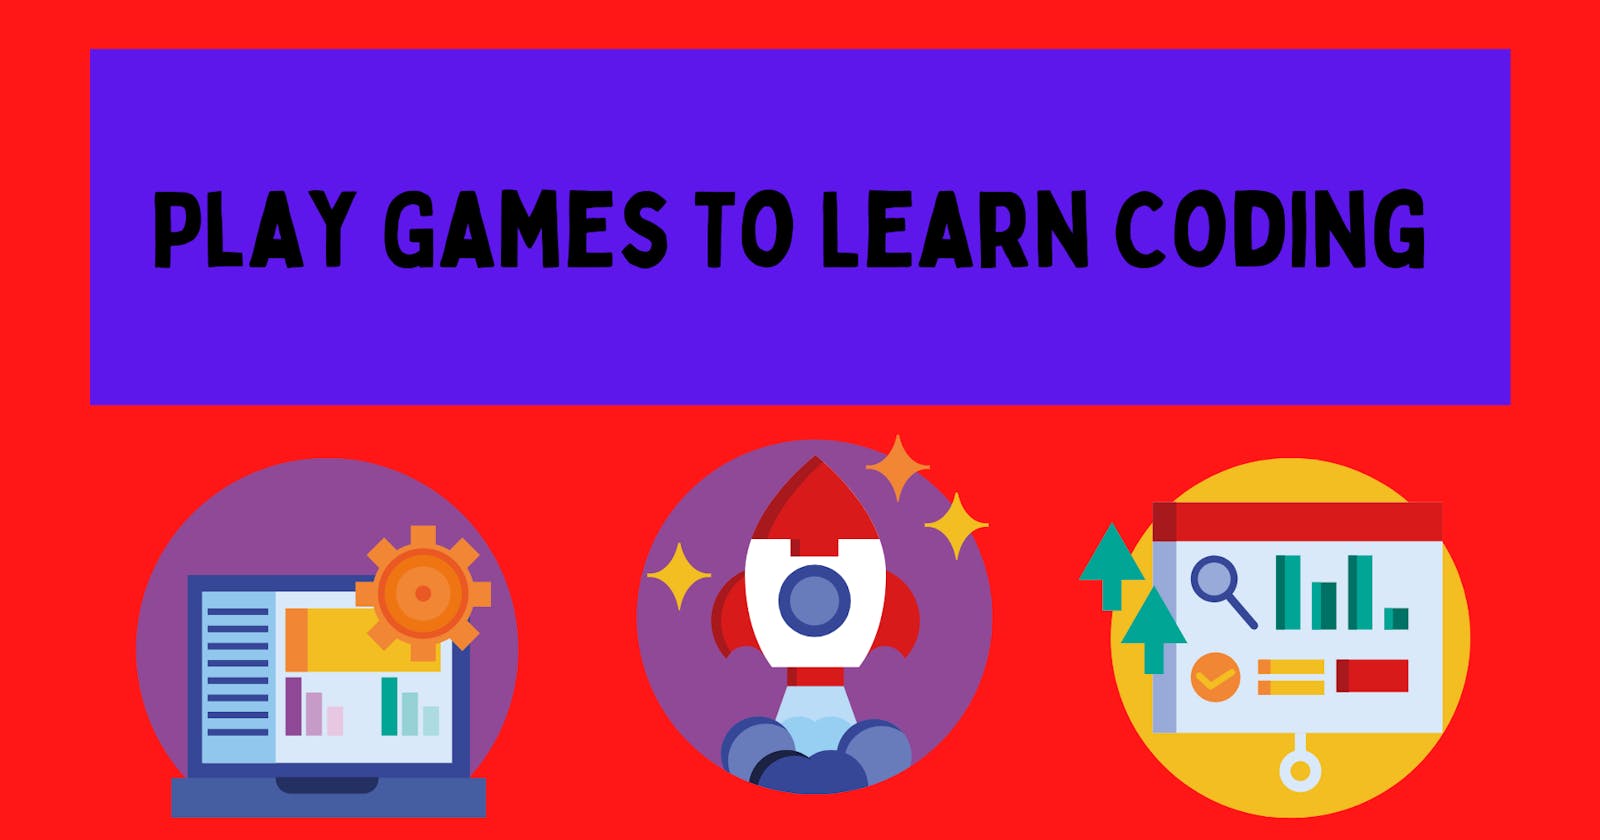 Play Games To Learn Coding 🎮